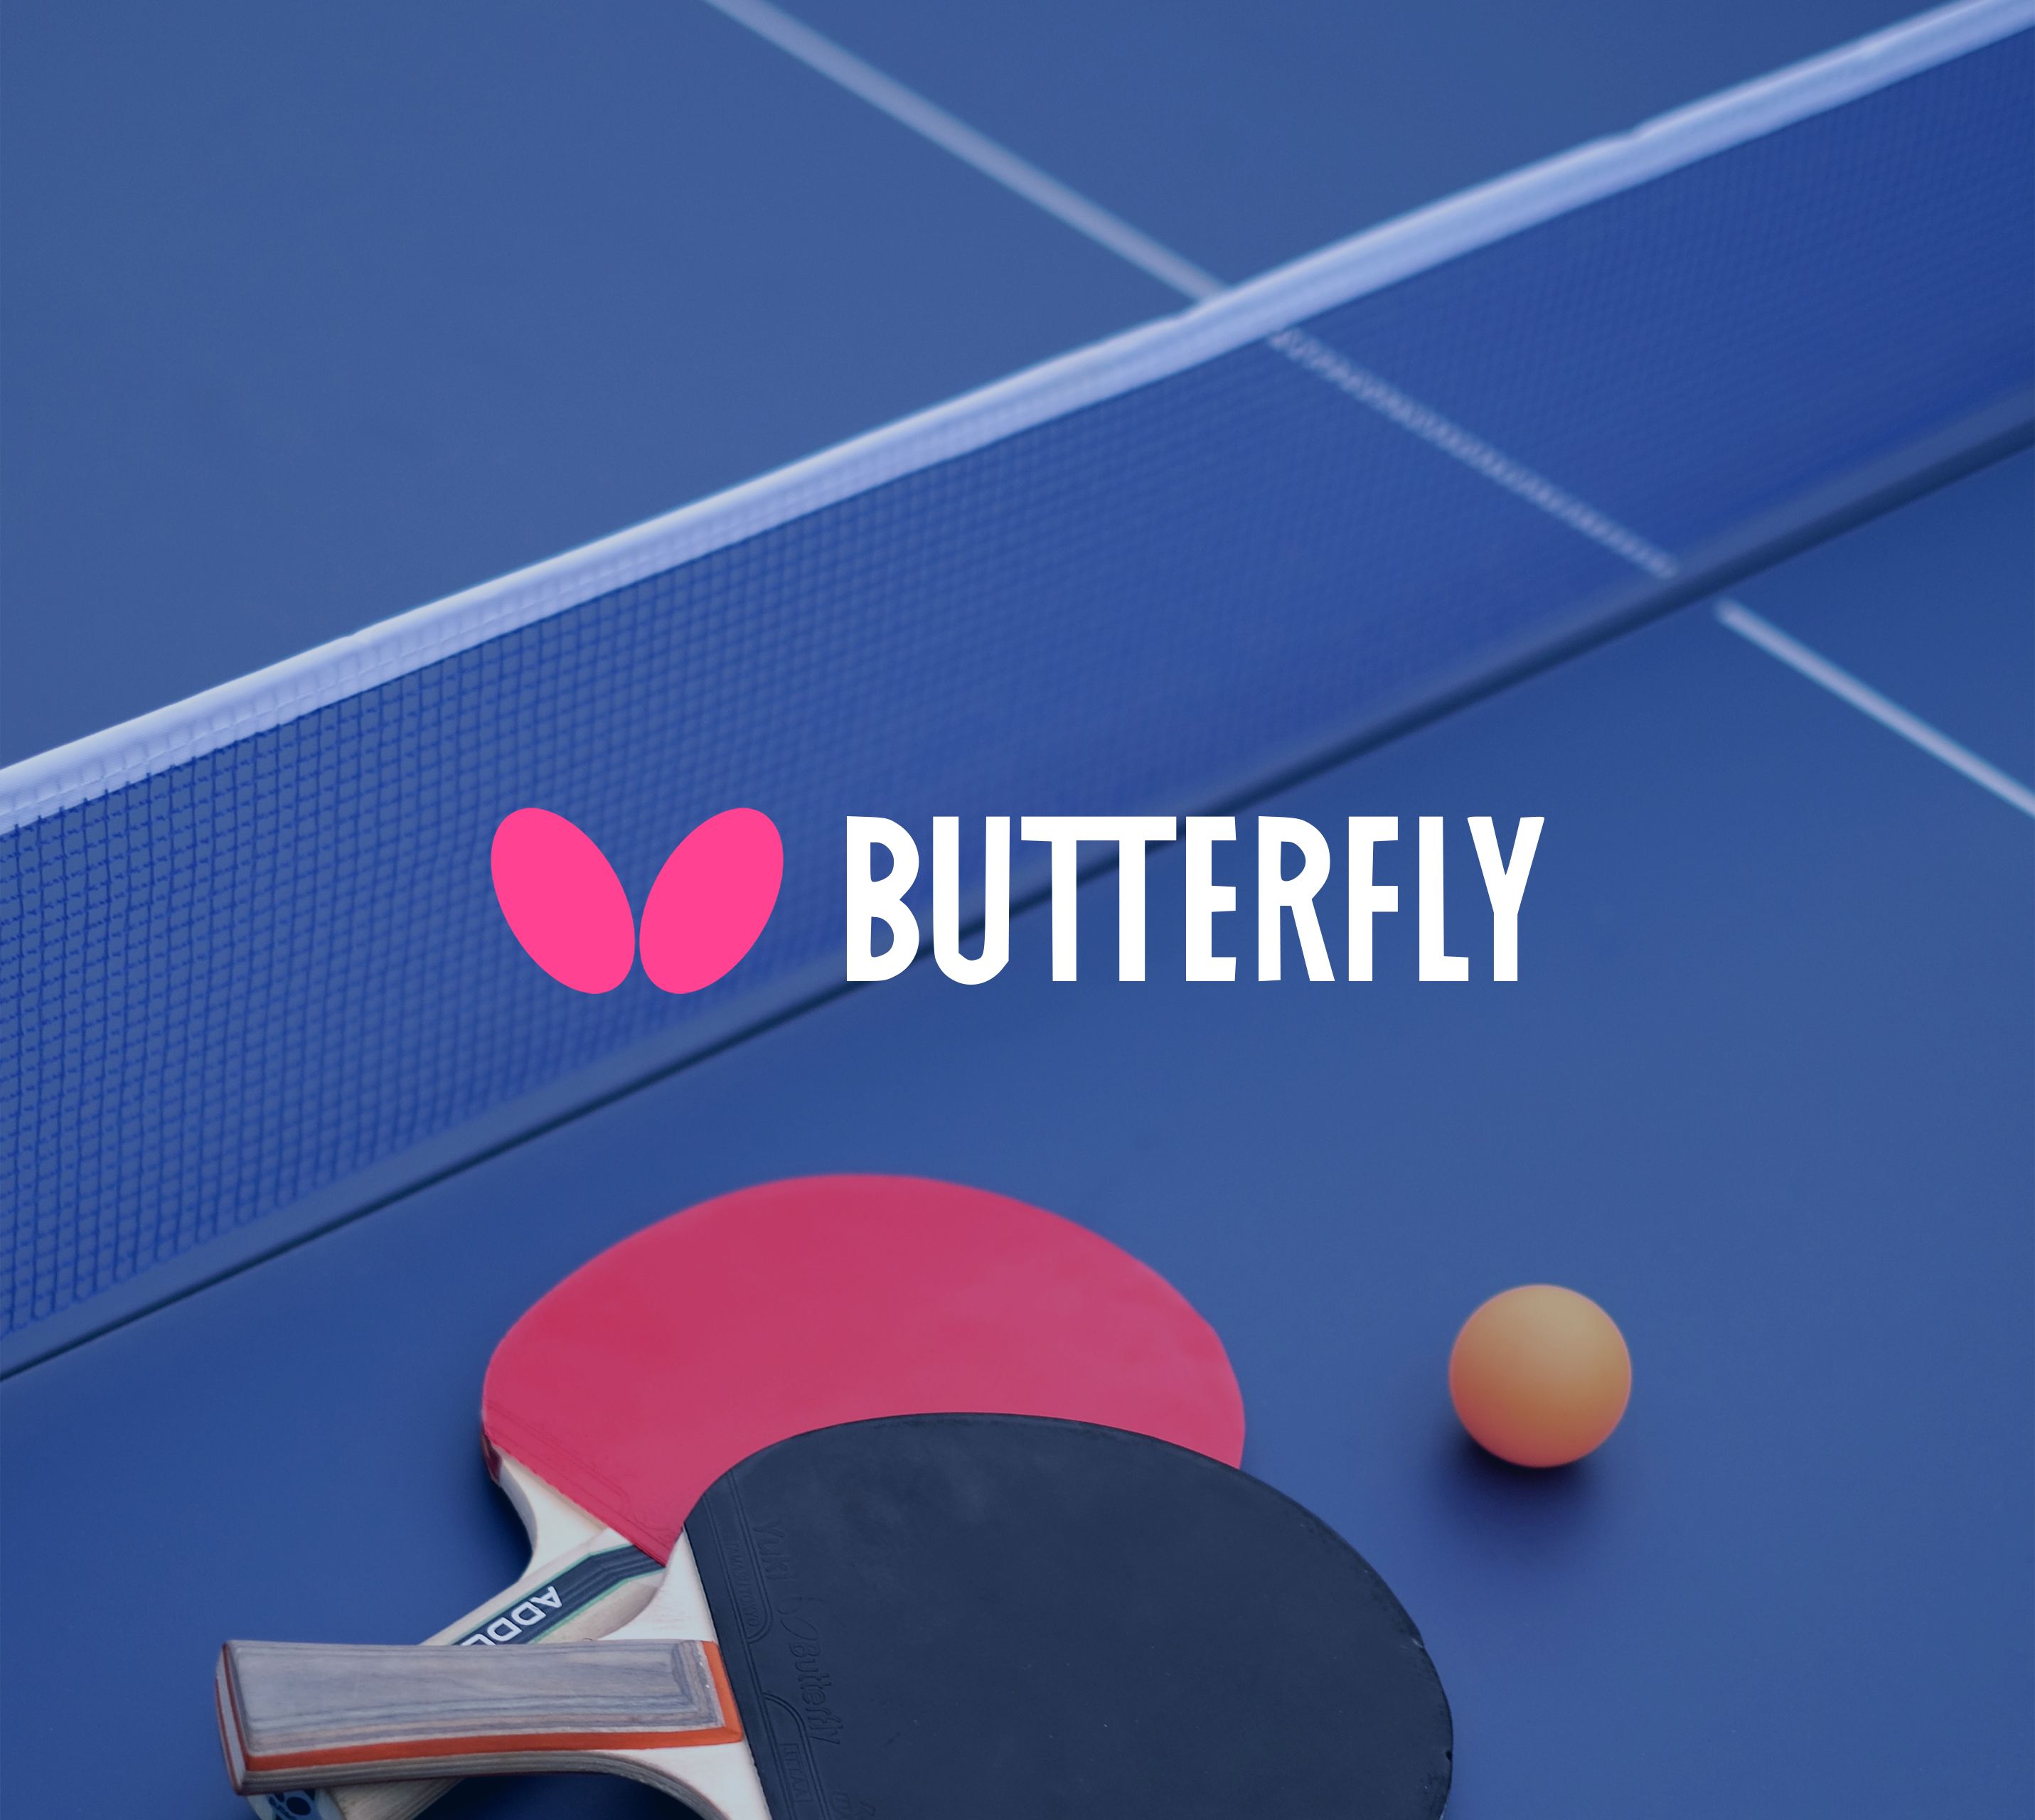 Picture with table tennis paddles and the Butterfly logo